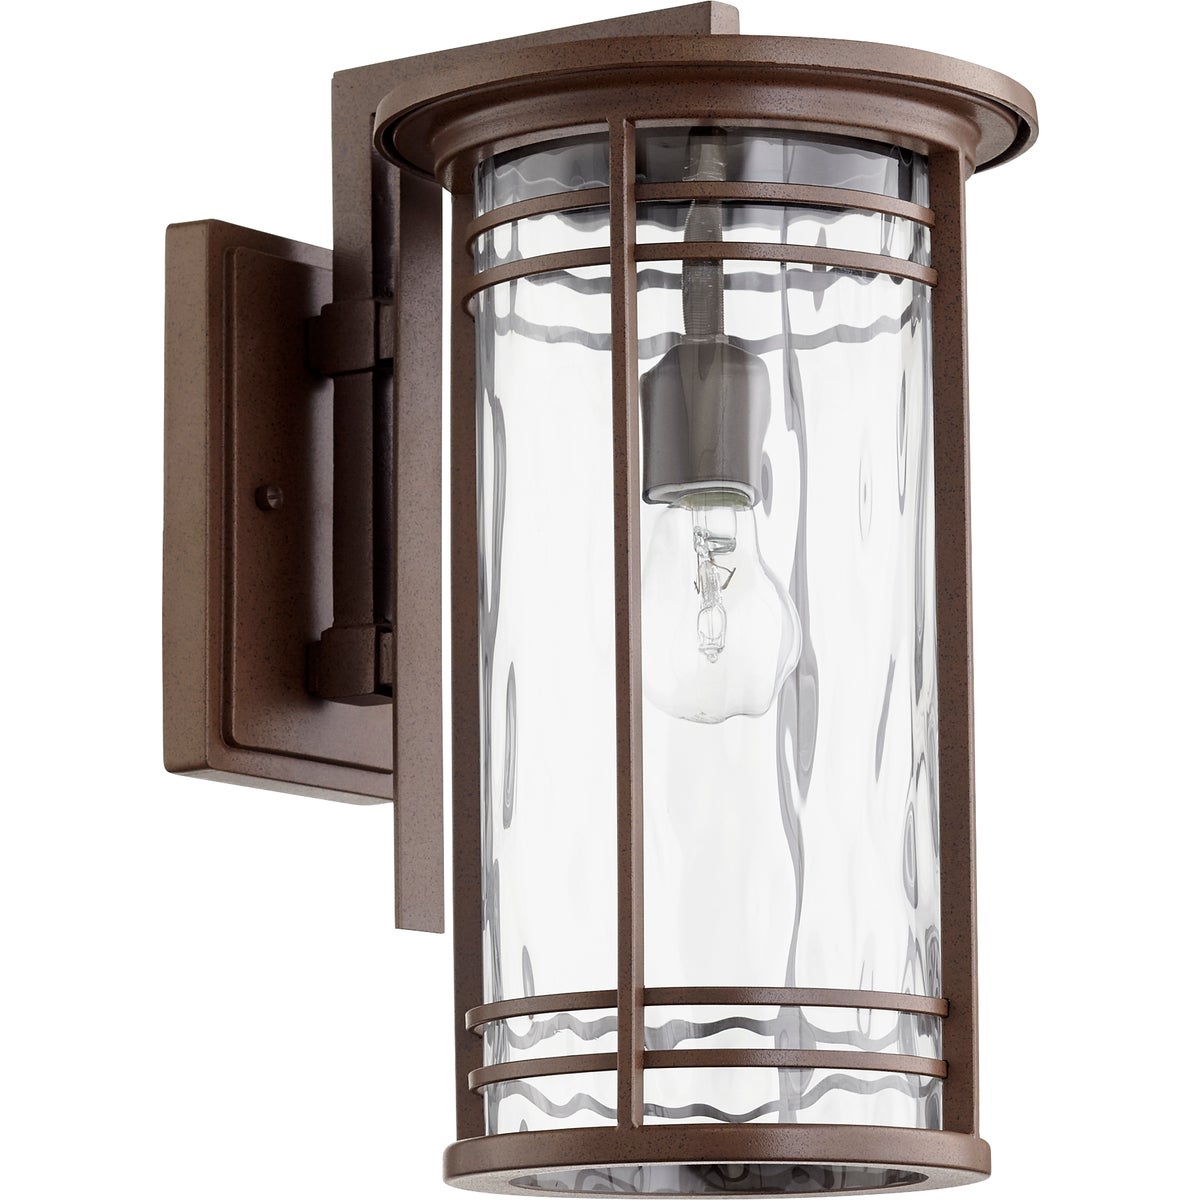 Modern Outdoor Wall Light with clear glass cylinder shade, oiled bronze finish. Clean-lined elongated drum silhouette. UL Listed, Wet Location. 9.25&quot;W x 16.25&quot;H x 12.25&quot;E. 100W, 120V, Medium E26 base. Dimmable. 2-year warranty. Stars and Stripes Lighting.